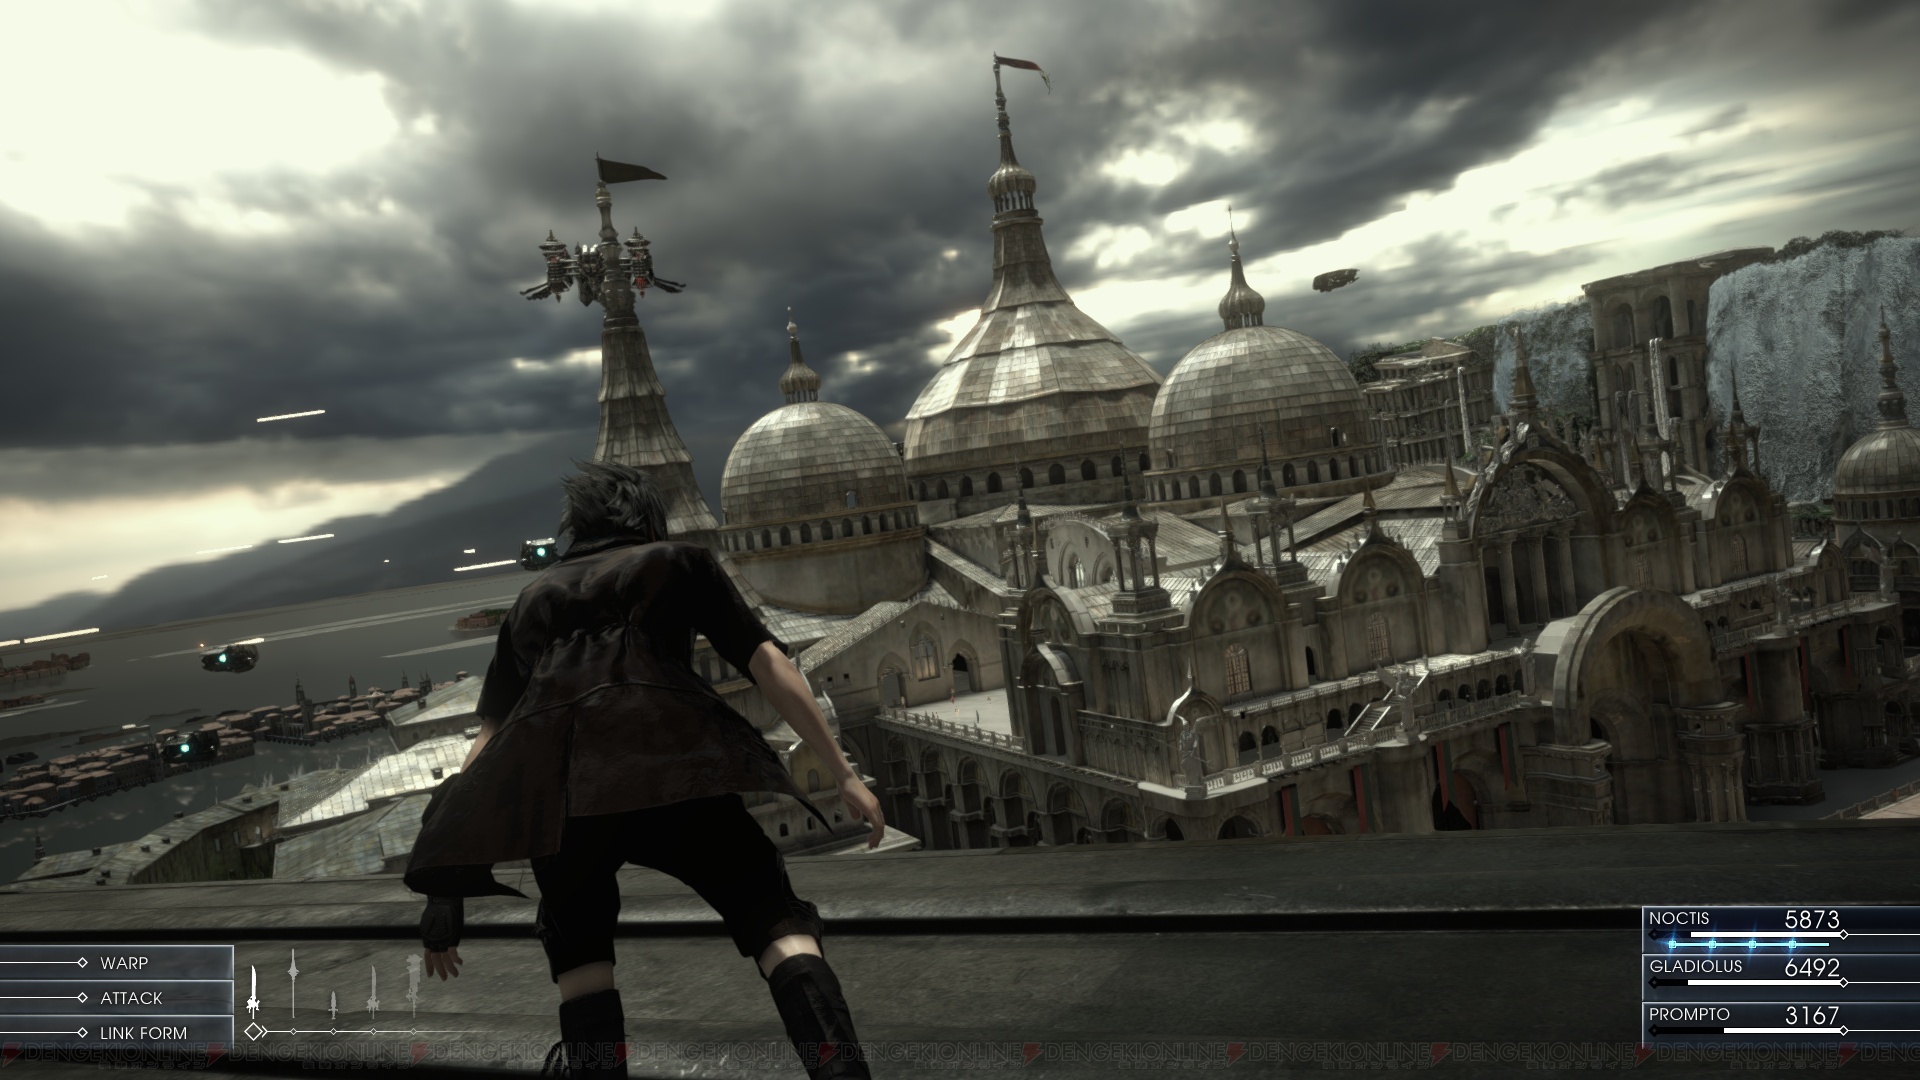 Many areas in the game are also designed to be taken from real-world landmarks and places of mystery.